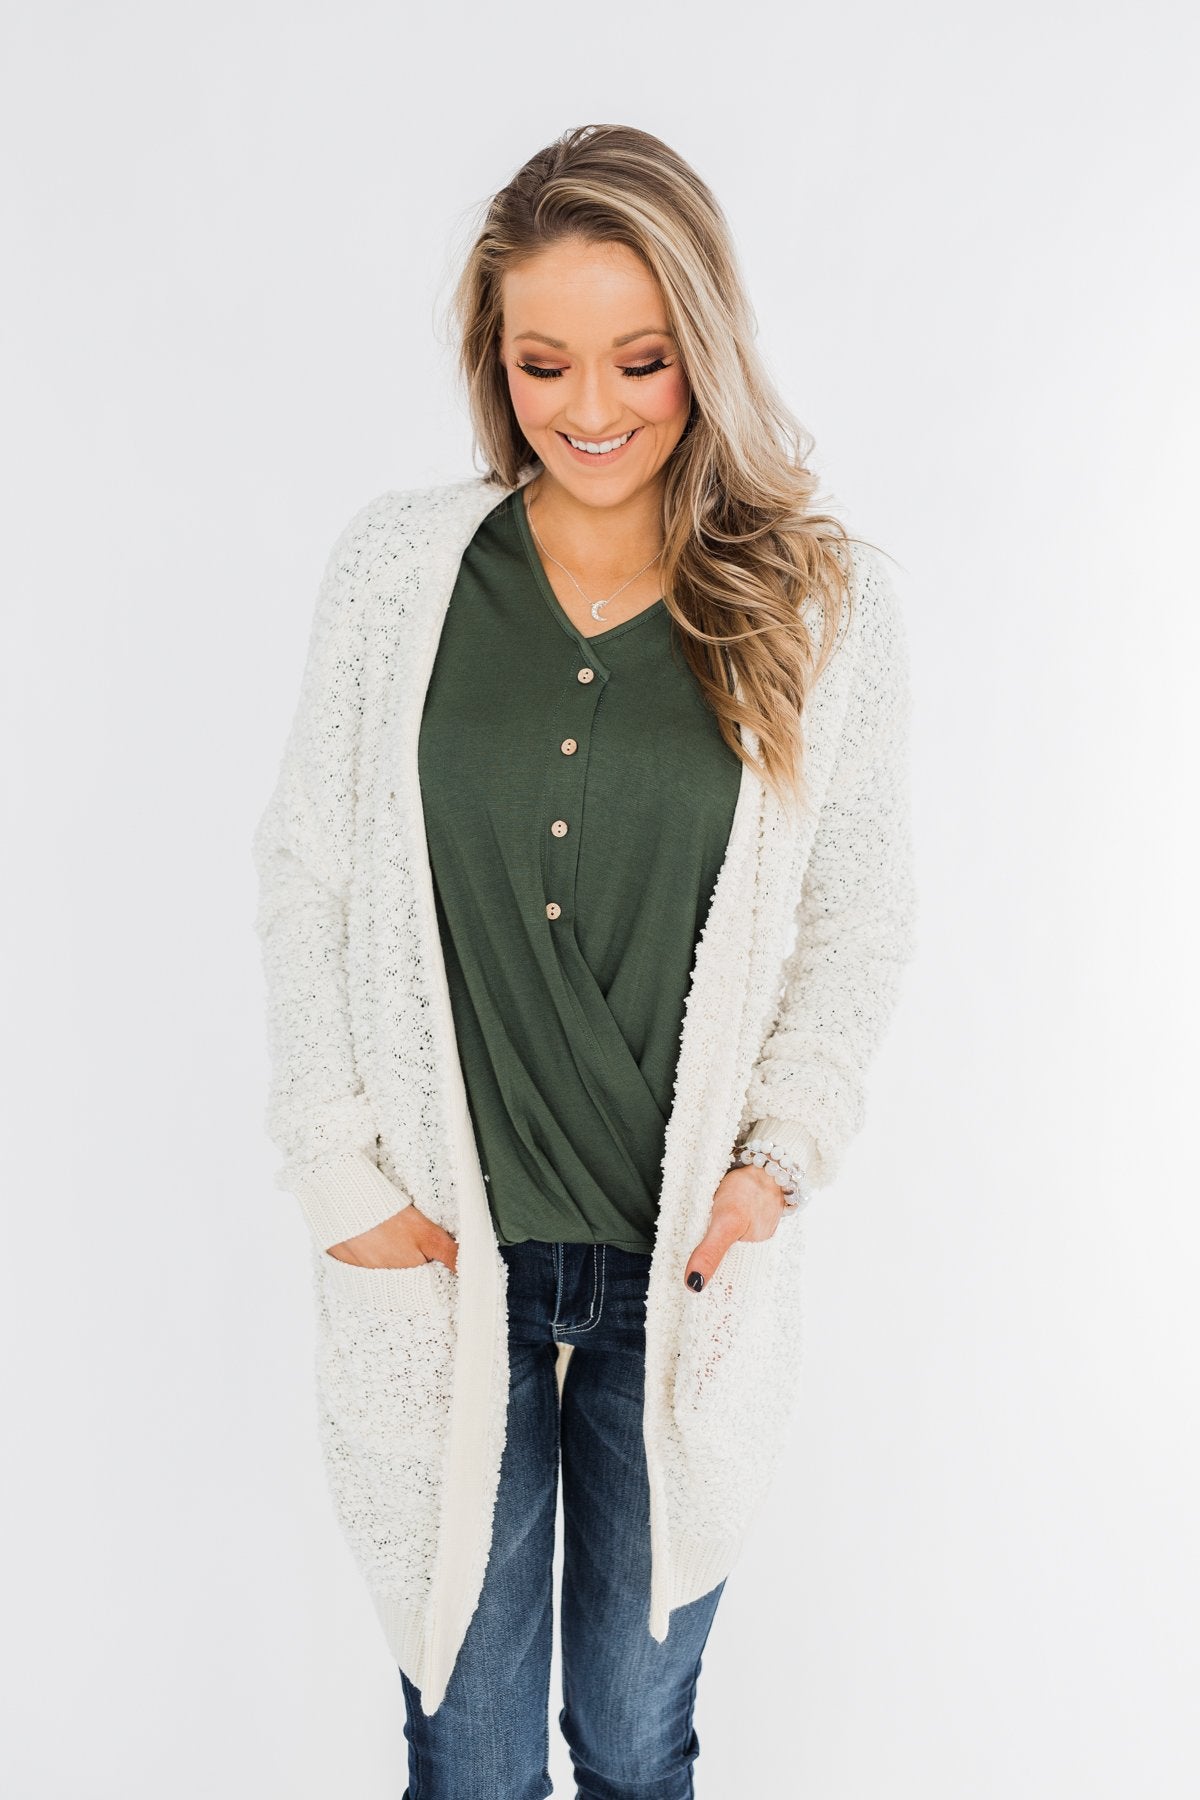 Left Me Speechless Wrap Button Top- Olive